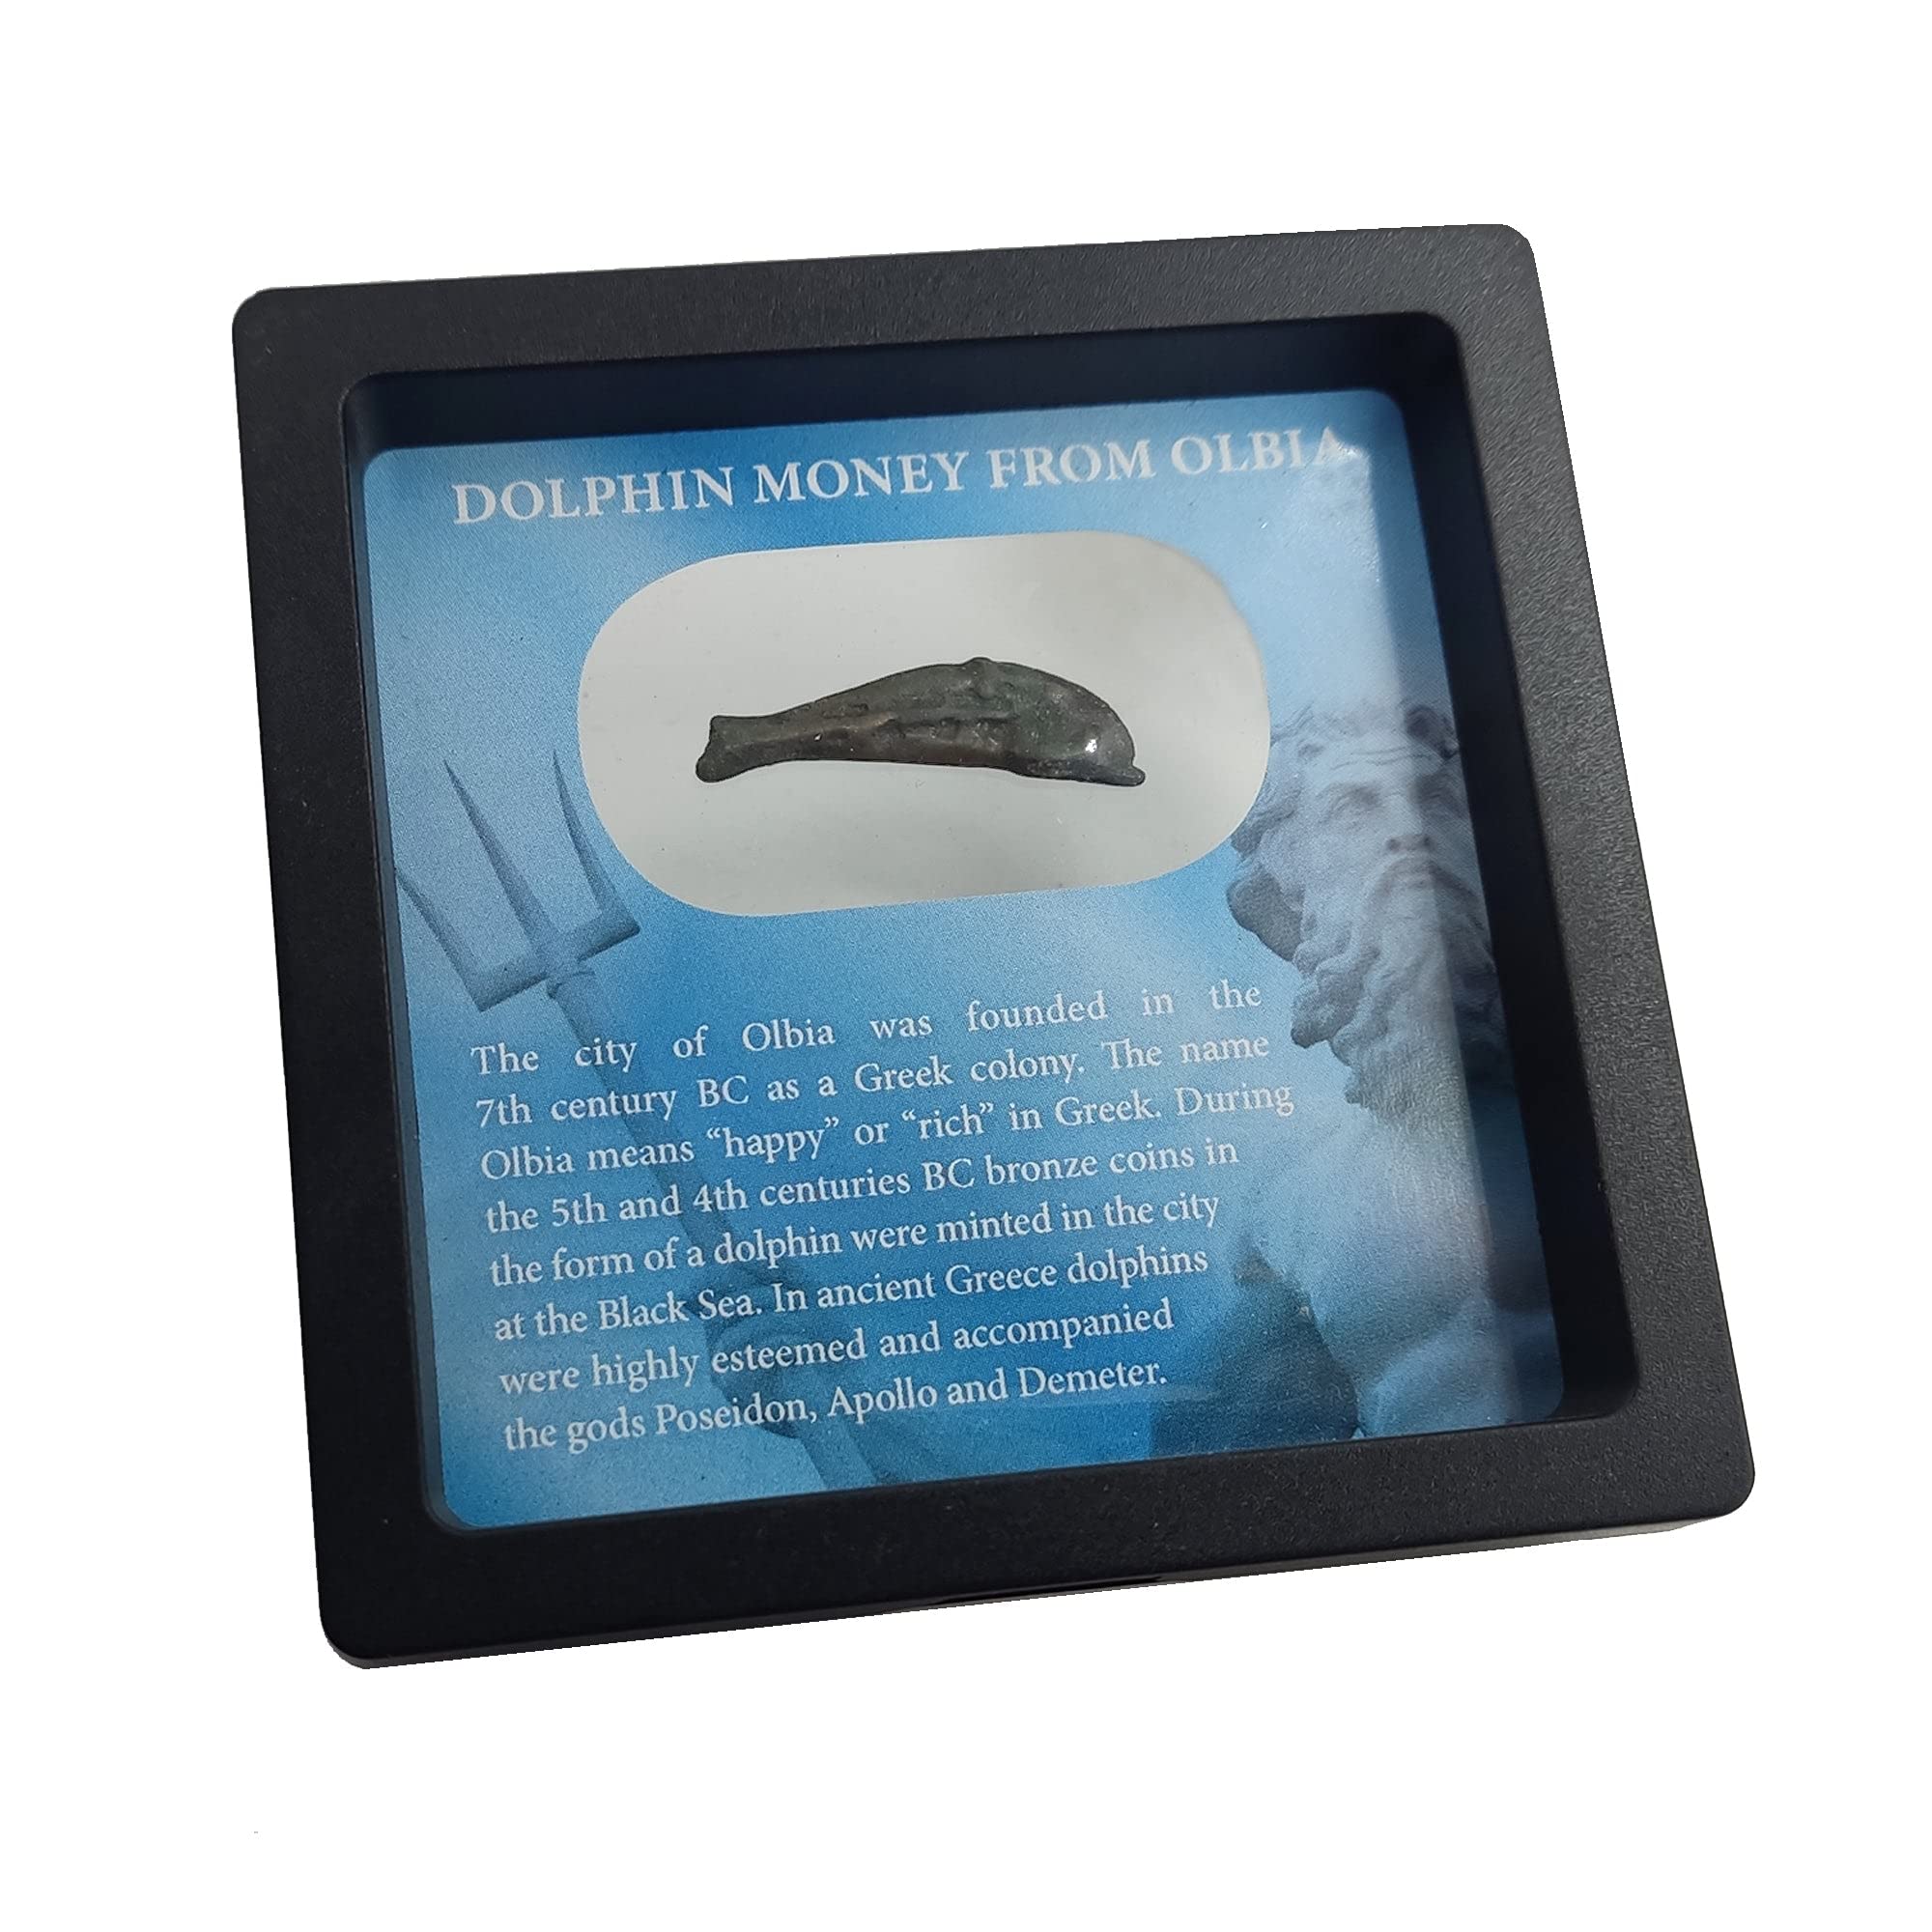 IMPACTO COLECCIONABLES Original Dolphin Greek Coin in a Coin Display Frame - Rare Coin Issued Between 5th-4th Century BC